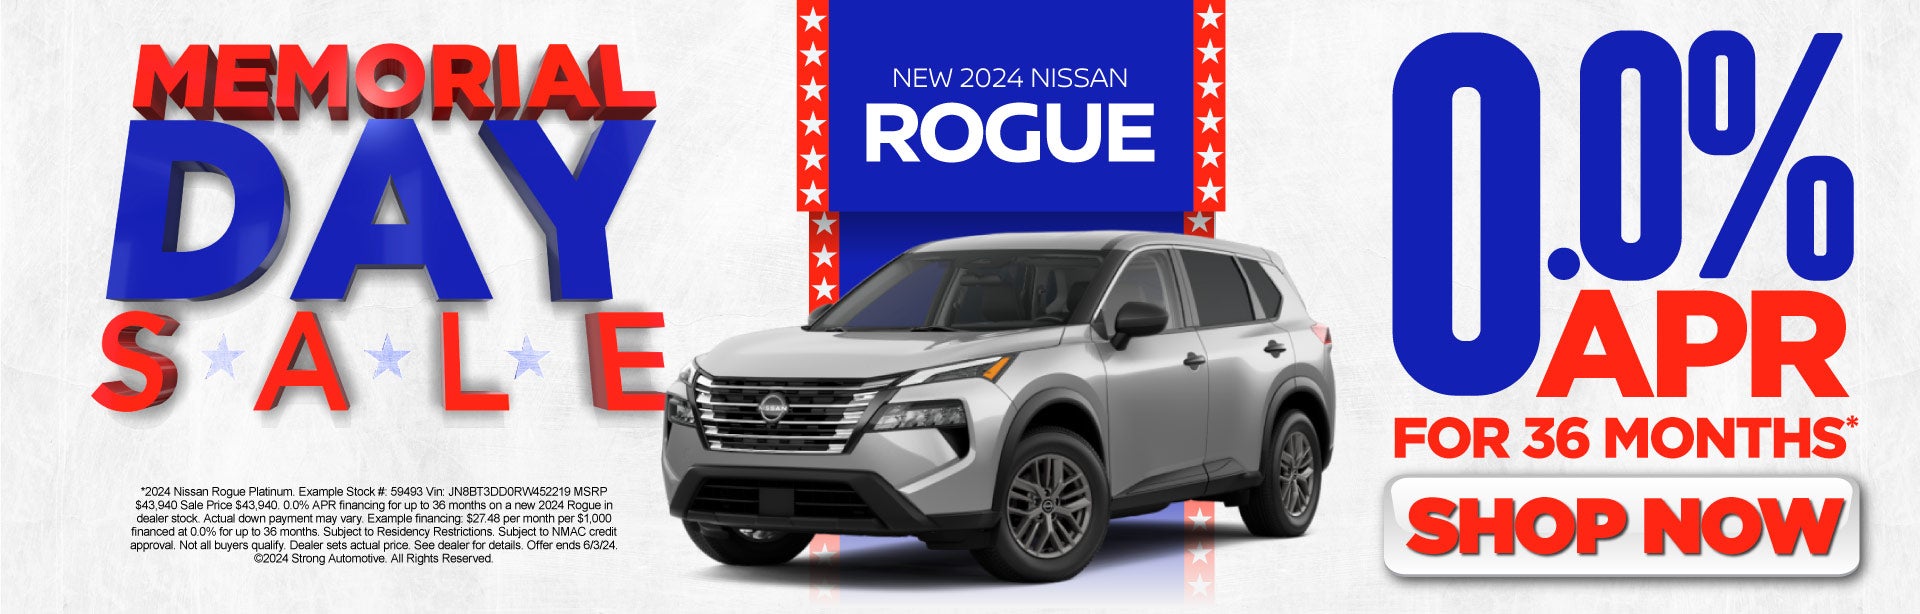 2024 Nissan Rogue 0.0% APR for 36 months